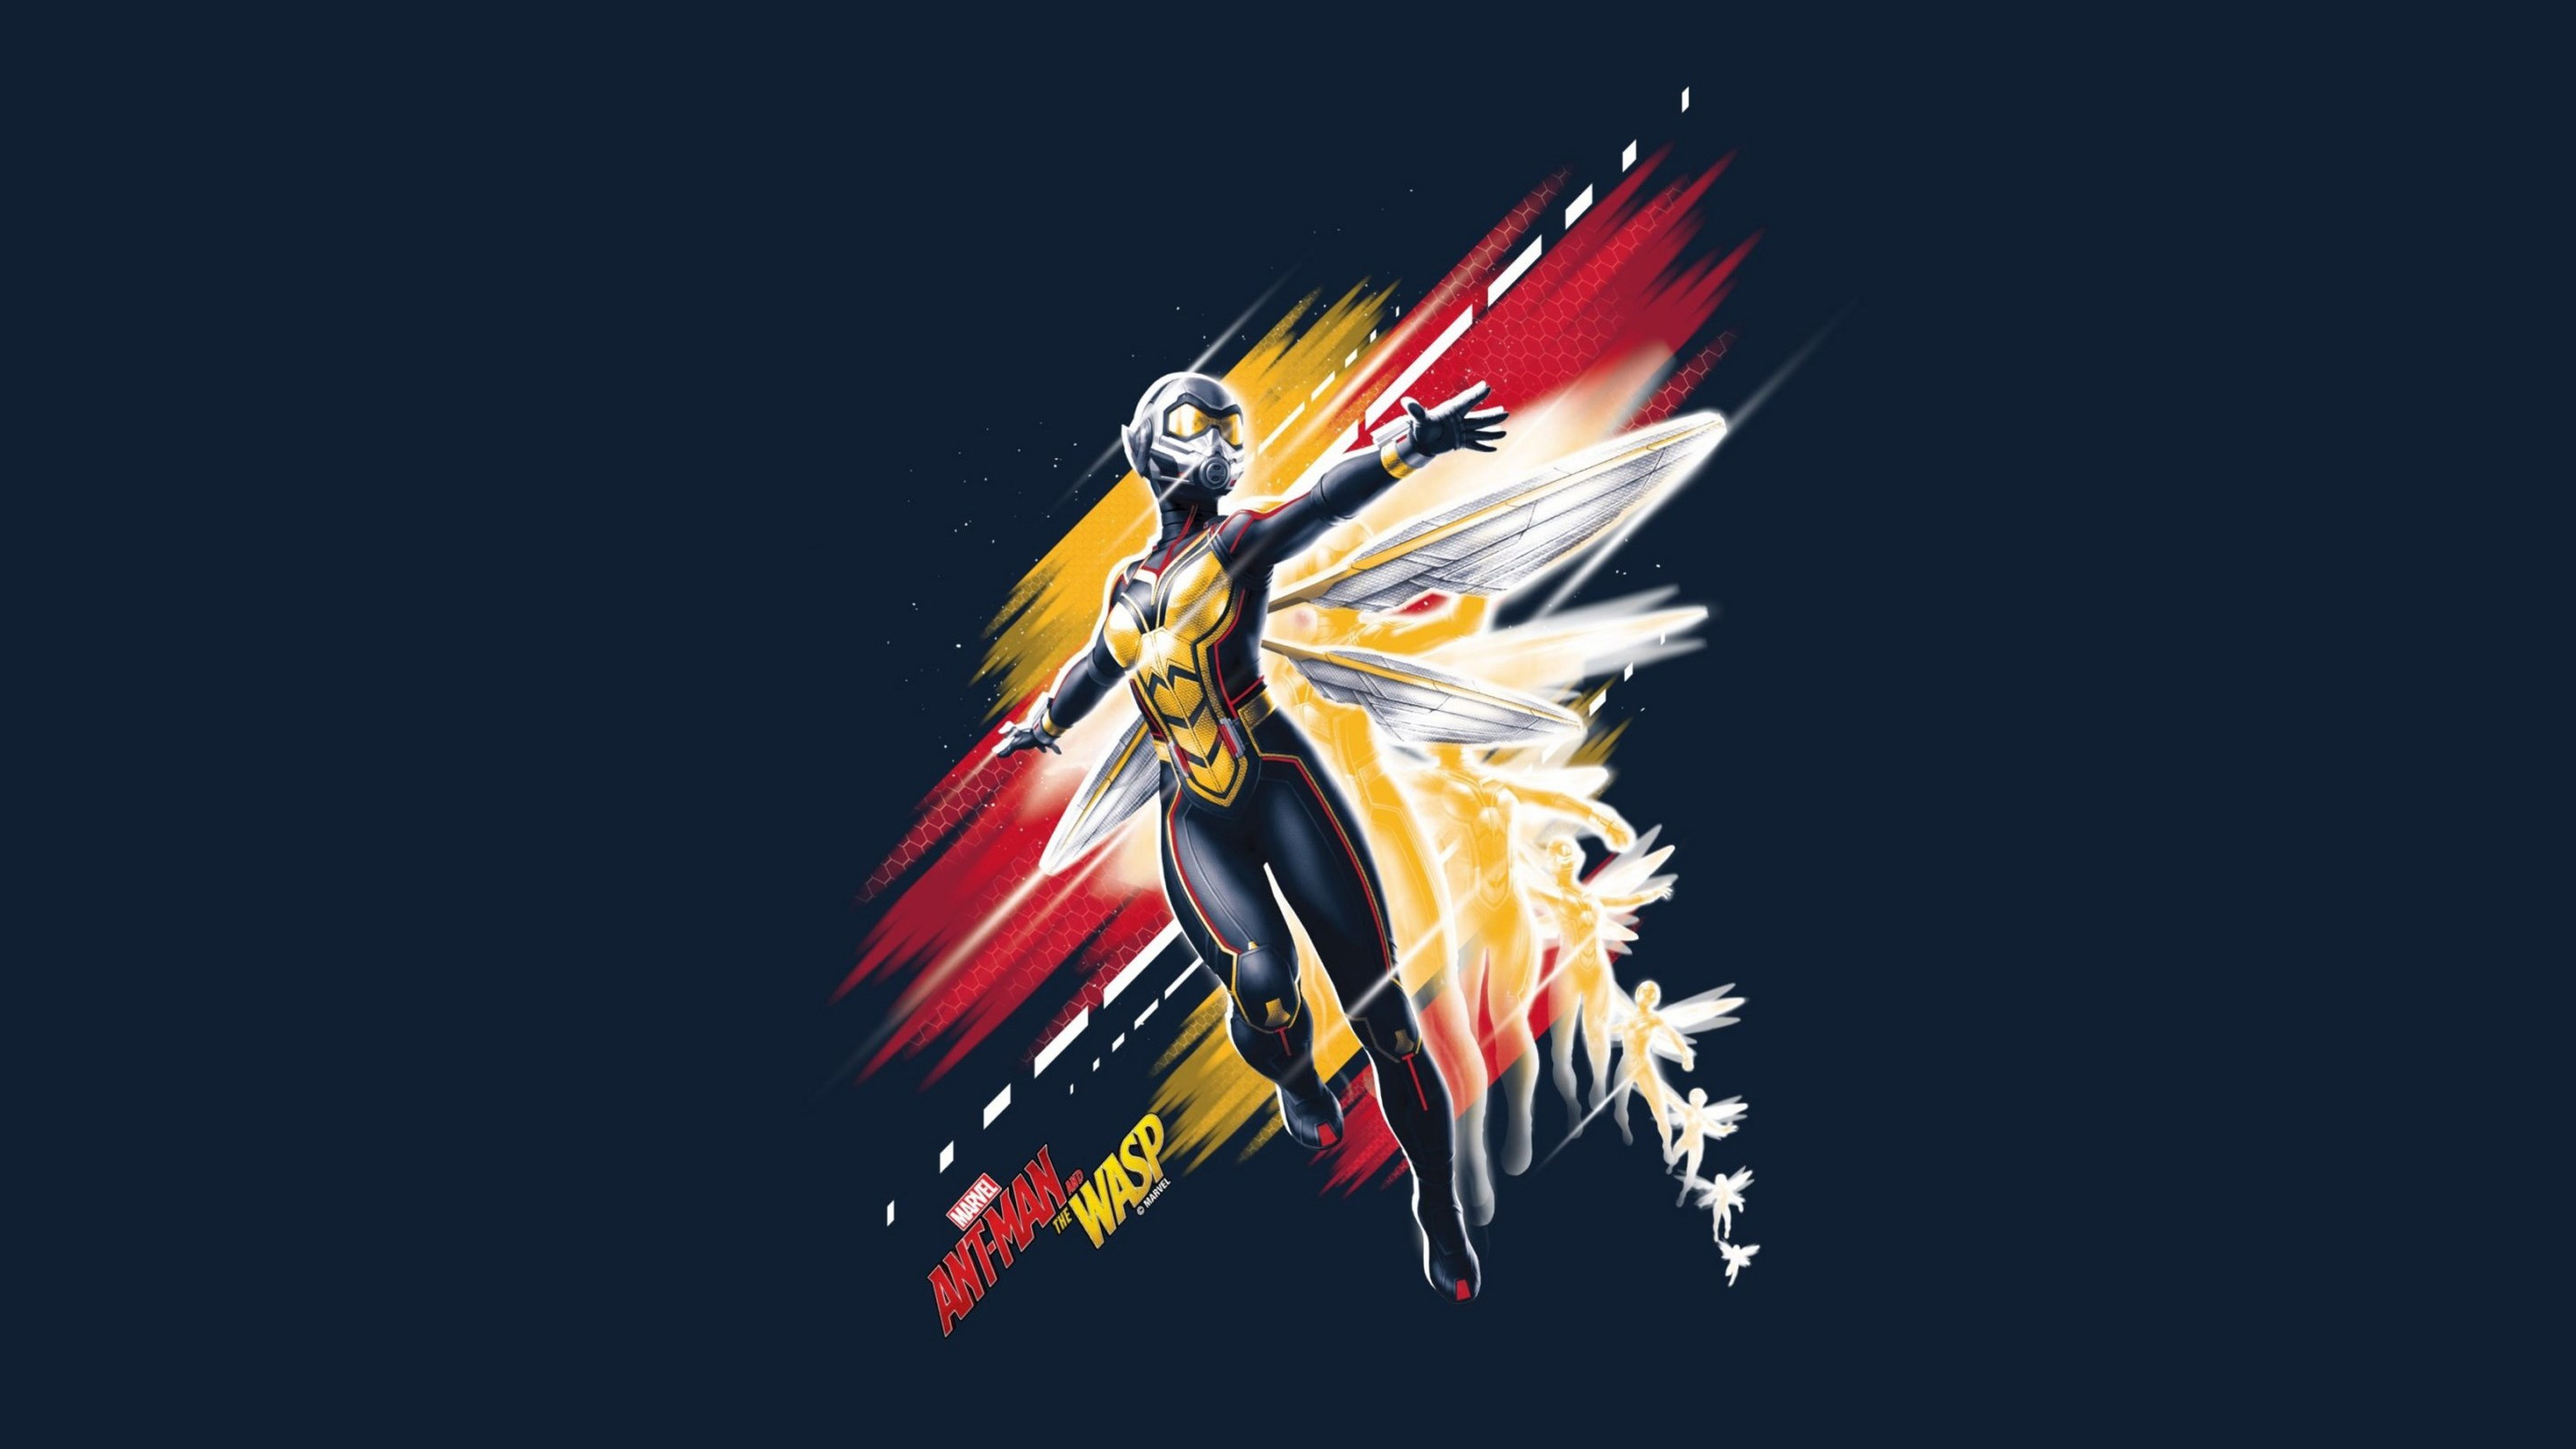 Ant-Man and the Wasp wallpaper 2880x1620